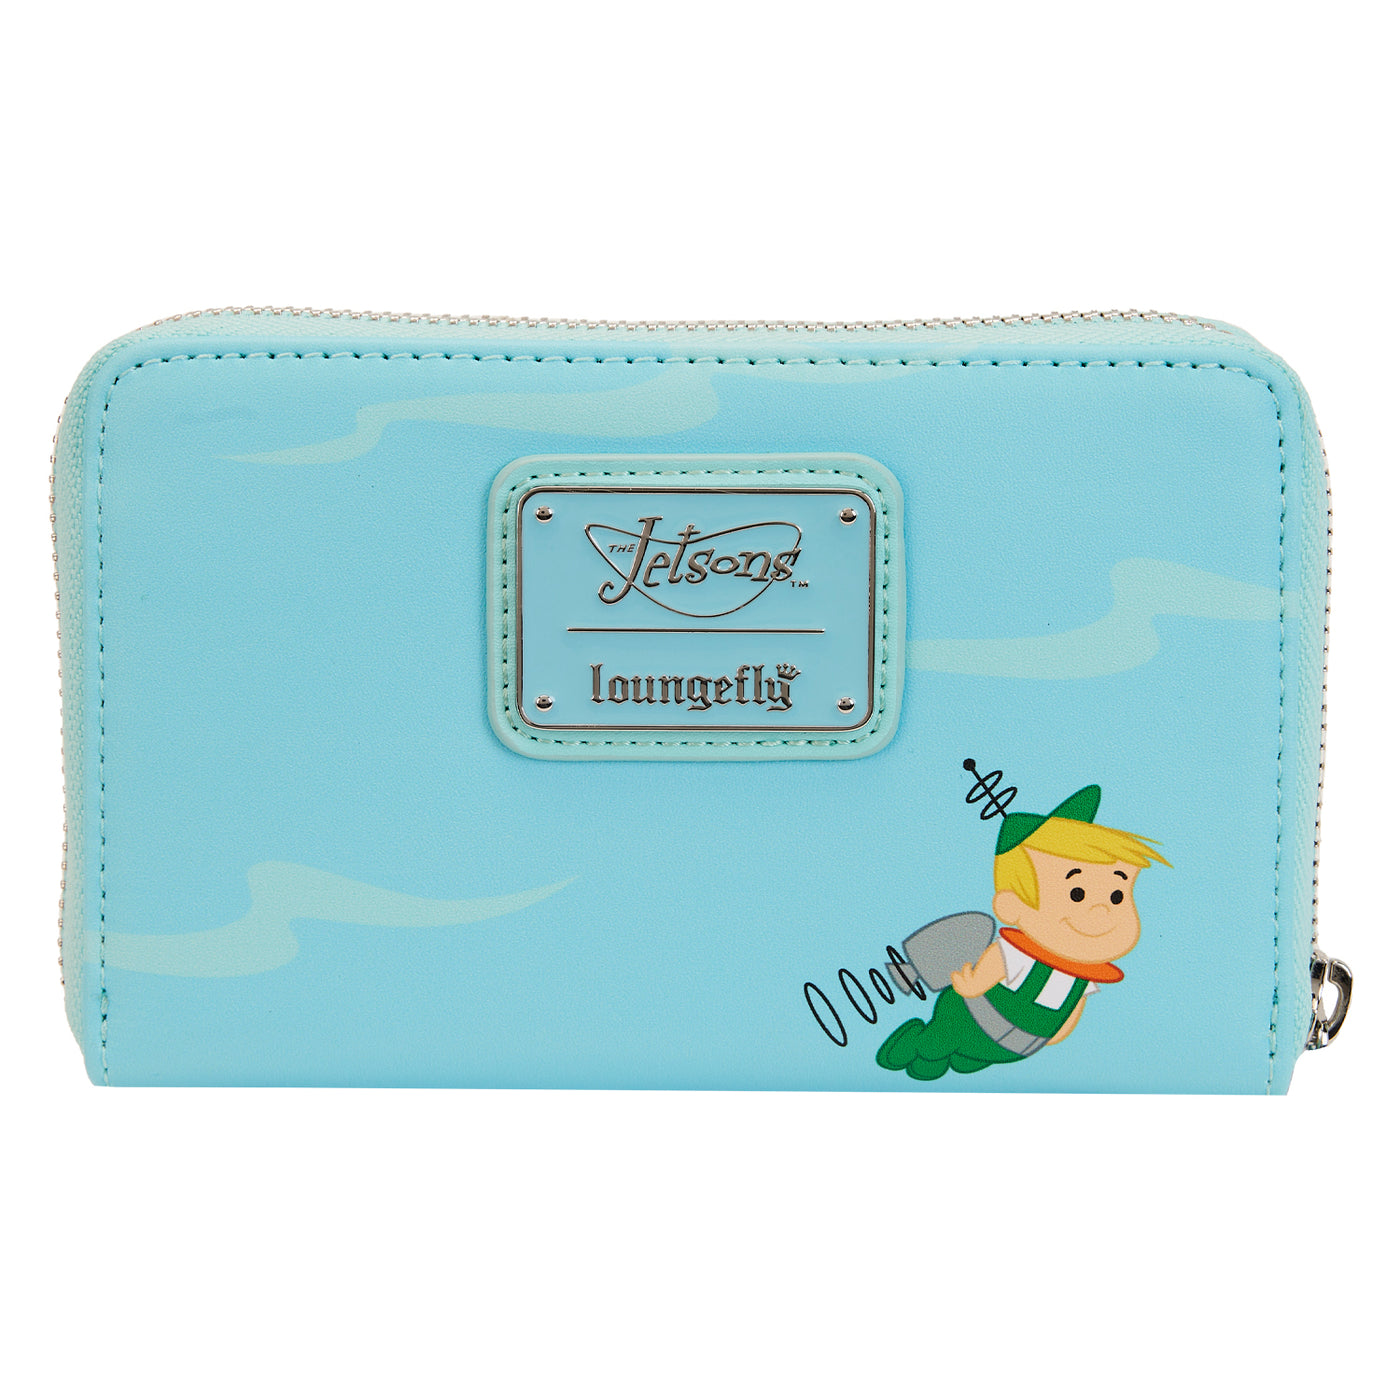 WB The Jetsons Spaceship Wallet